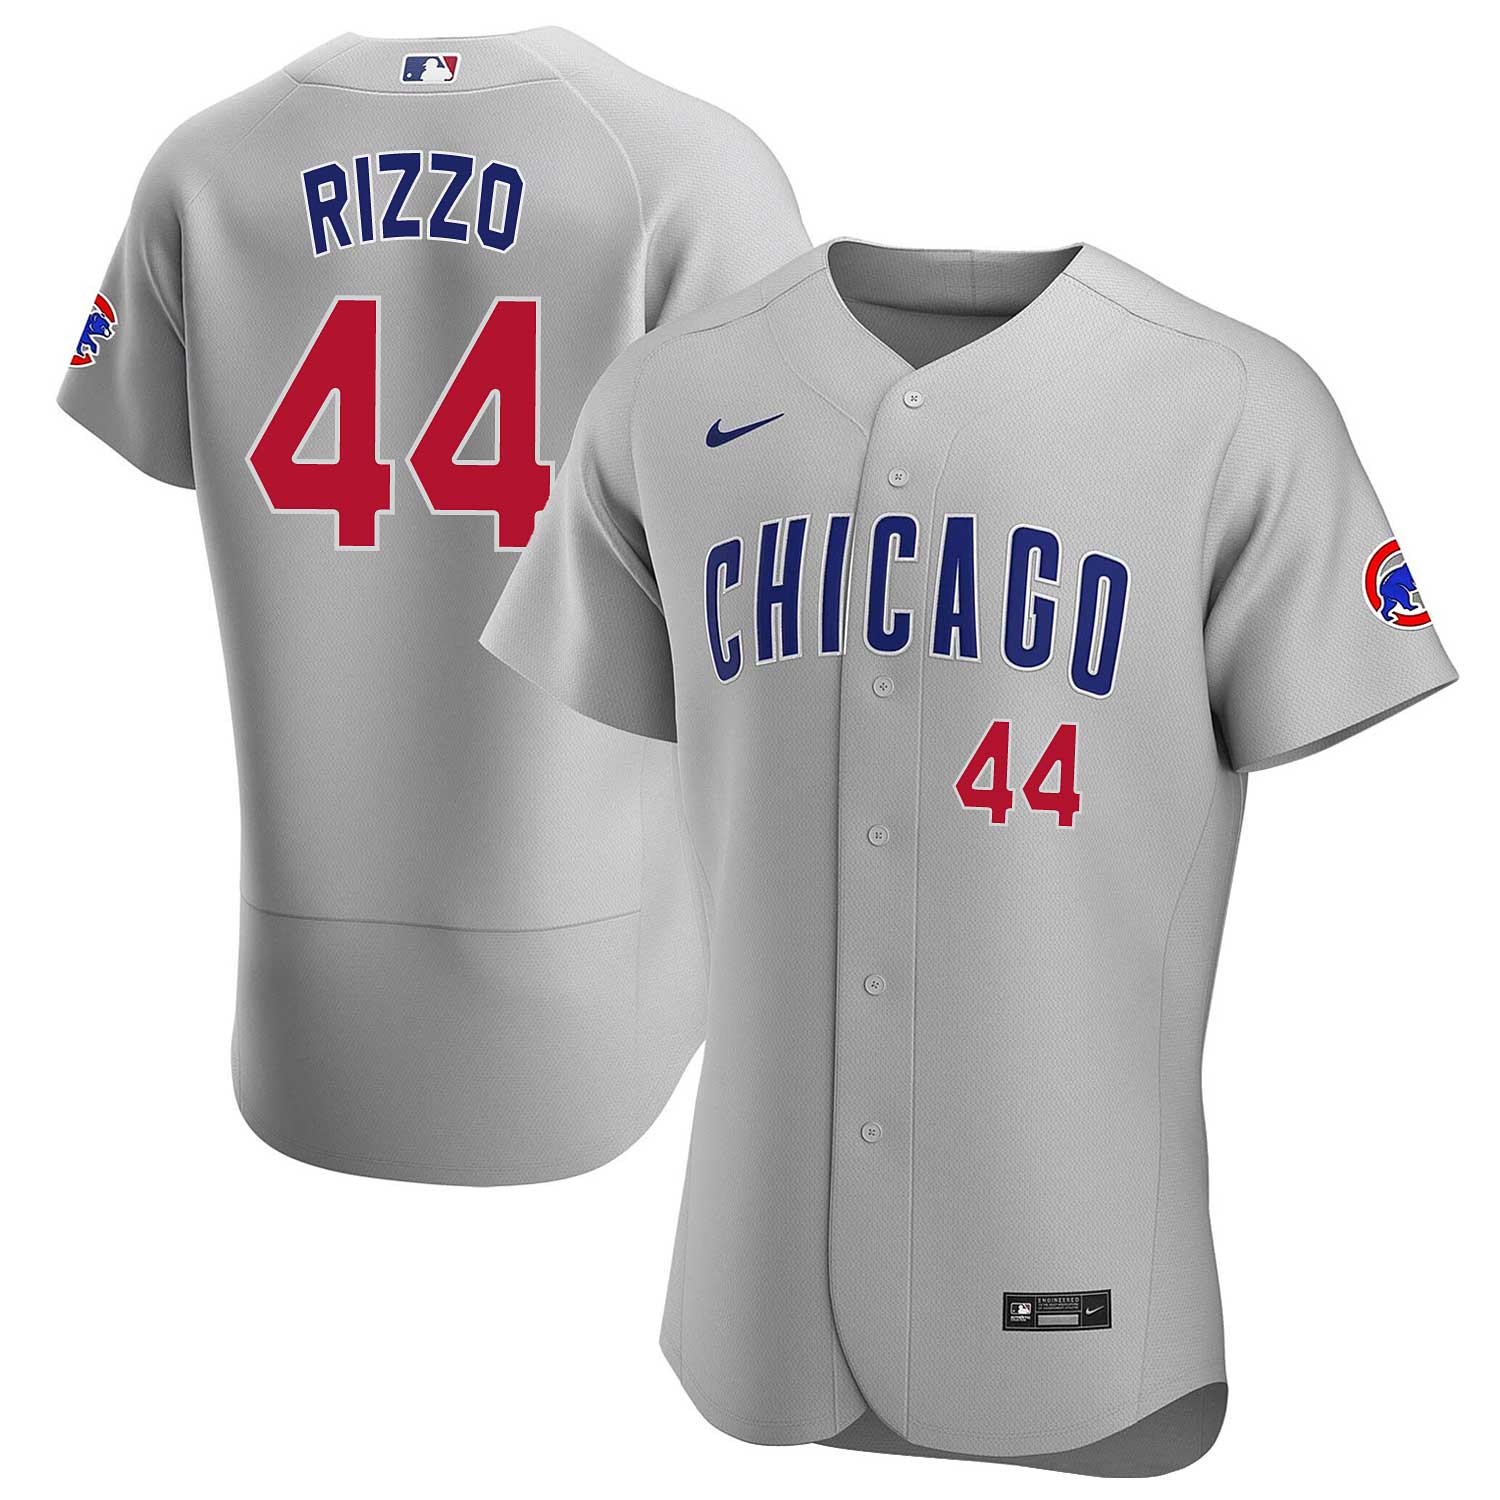 Chicago Cubs Anthony Rizzo Nike Road Authentic Jersey 56 = 3X/4X-Large